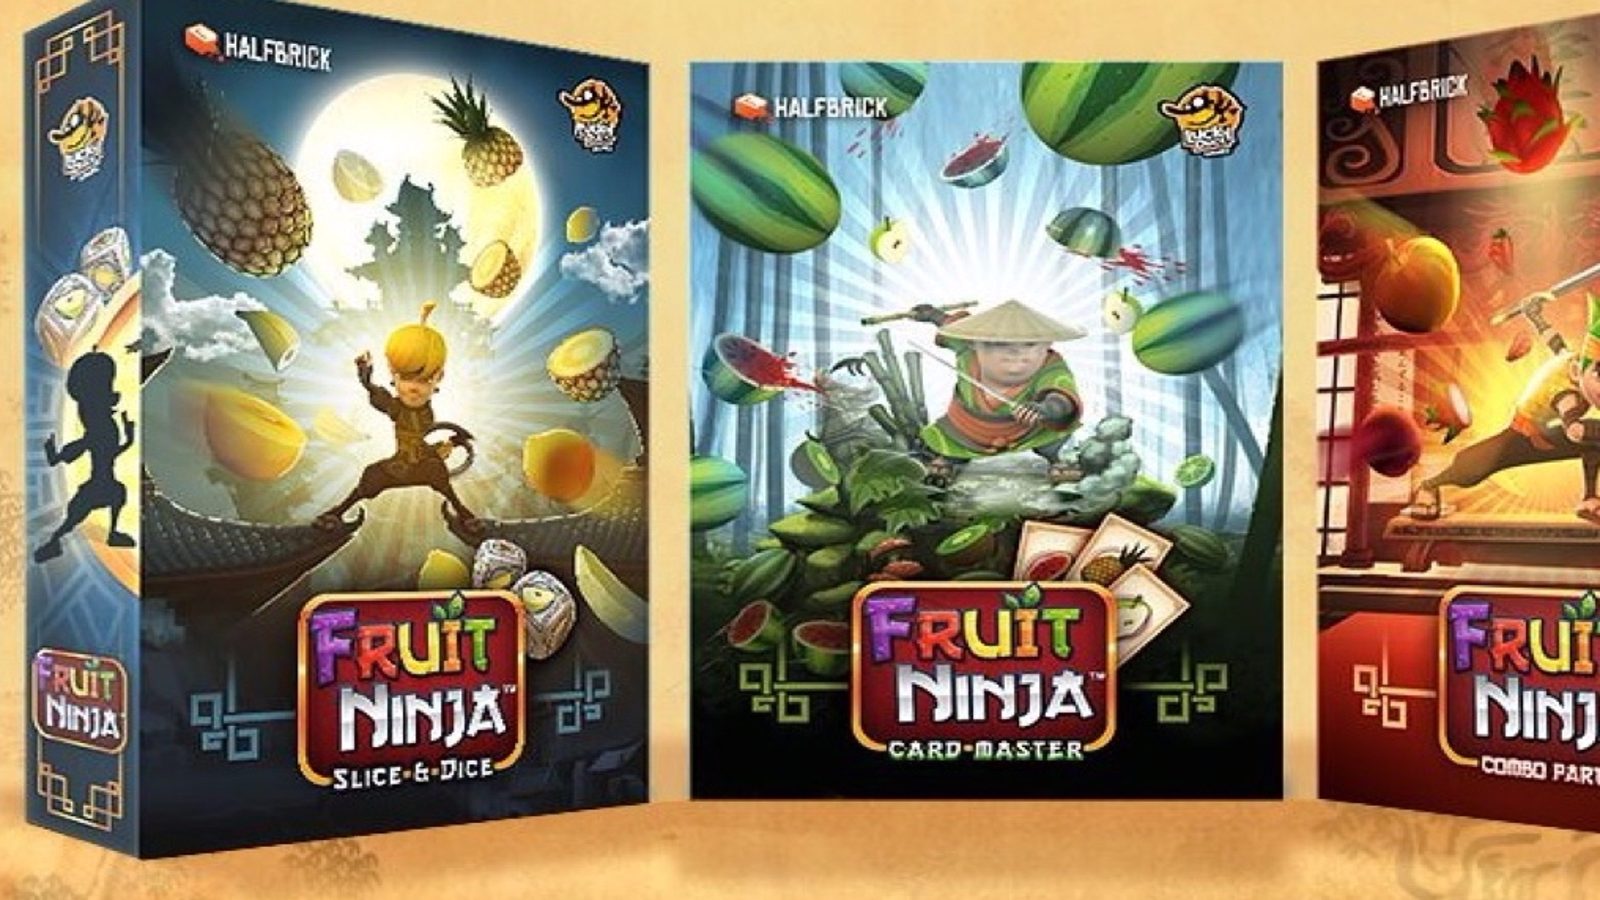 https://assetsio.reedpopcdn.com/fruit-ninja-is-coming-to-a-tabletop-near-you-1508880872211.jpg?width=1600&height=900&fit=crop&quality=100&format=png&enable=upscale&auto=webp